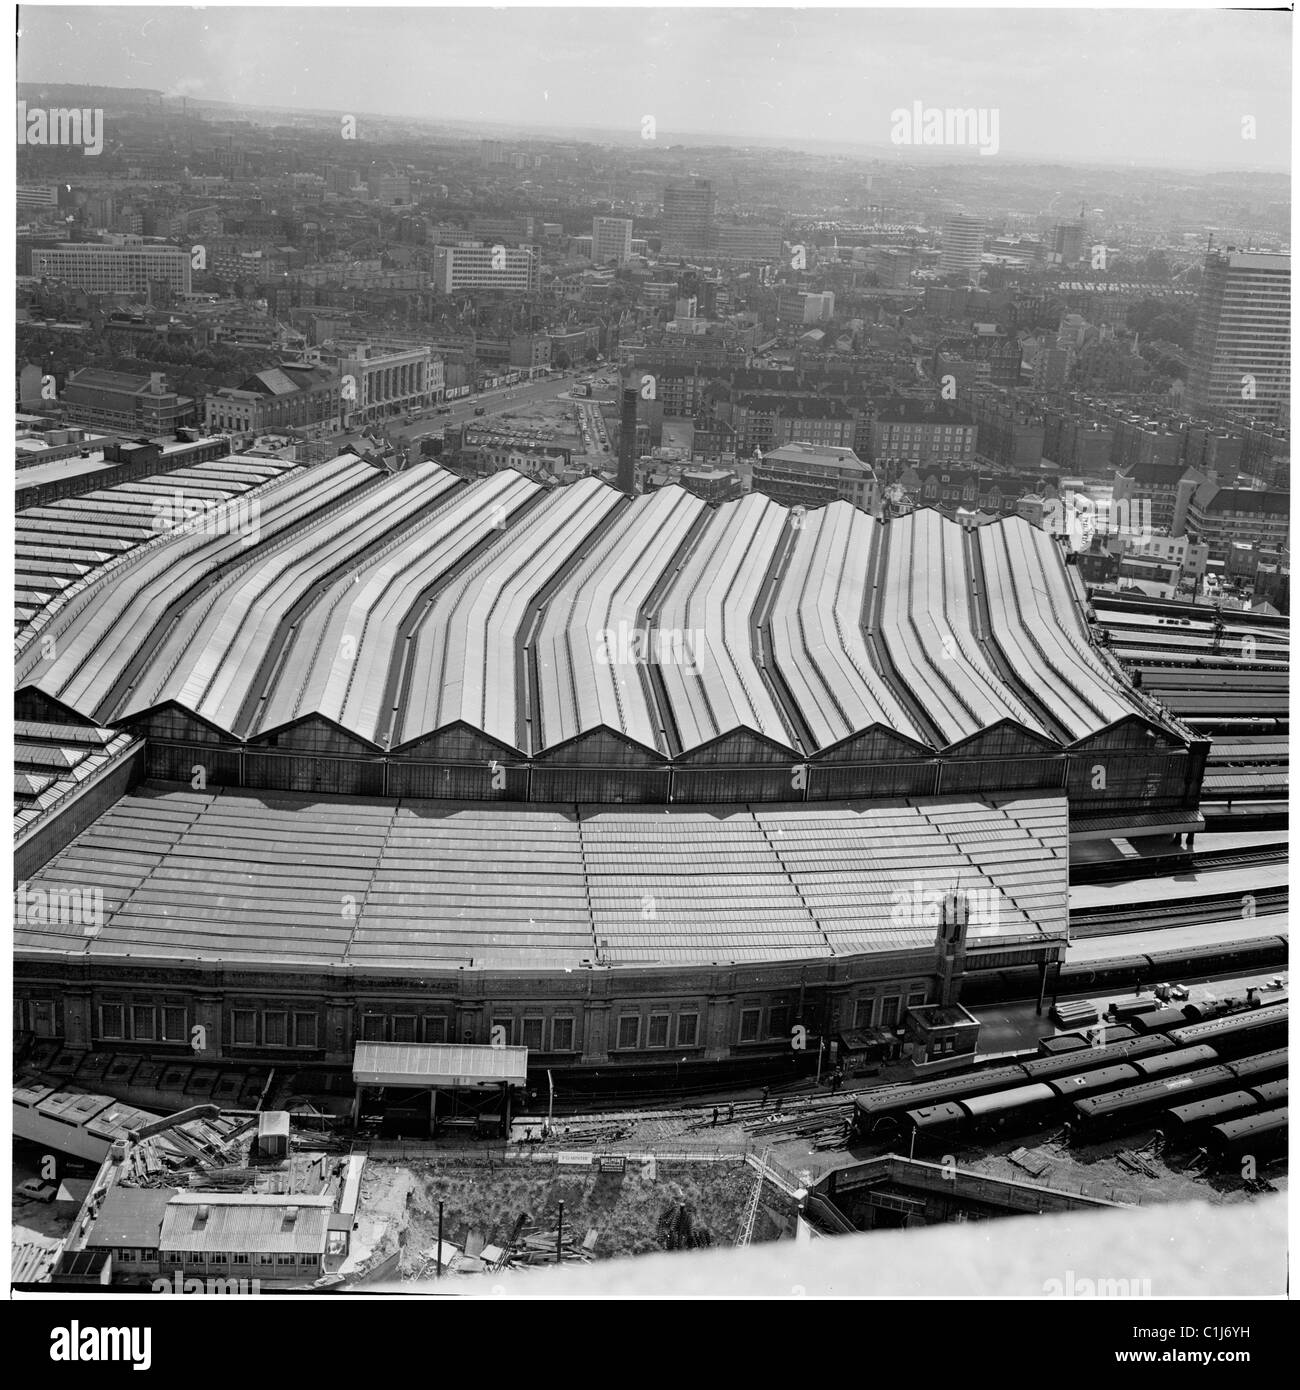 1960s, view from above of the distinctive curved train sheds roofs of St Pancras train station, Camden, London, built by Midland Railway in 1868. Stock Photo